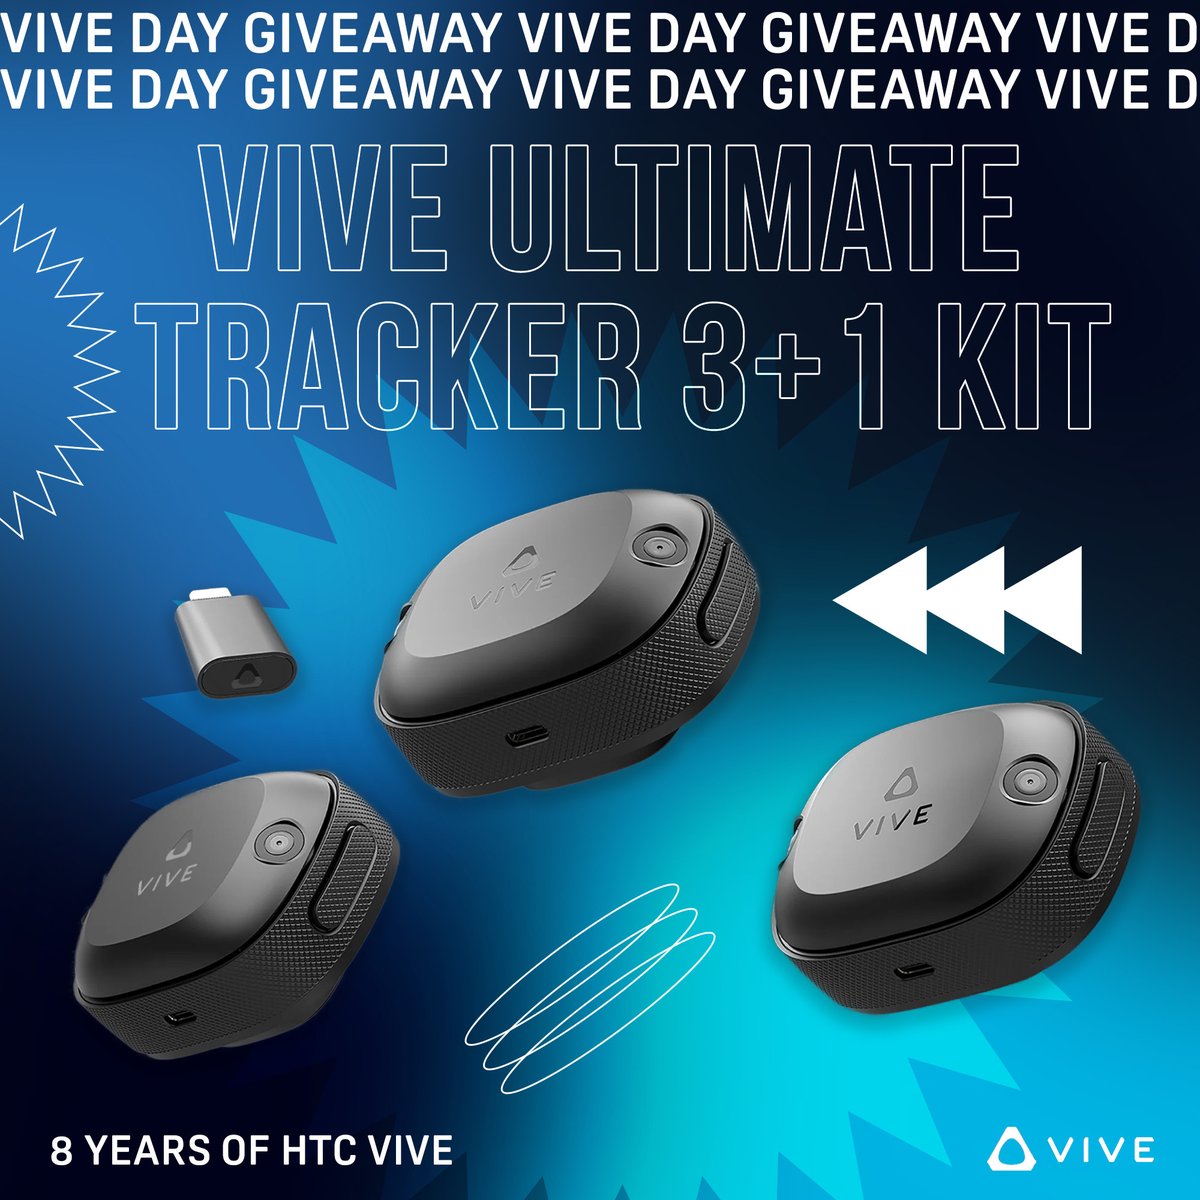 To mark this special occasion, we're giving away a VIVE Ultimate Tracker 3+1 Kit. 🎁 Repost this to enter! 🔁 🌟 Bonus Entry: What's the first game you'd play with the VIVE Ultimate Tracker? #Giveaway #VIVEUltimateTracker #VIVEDay2024 #8YearsOfVIVE #HTCVIVE #VIVEDay #VR